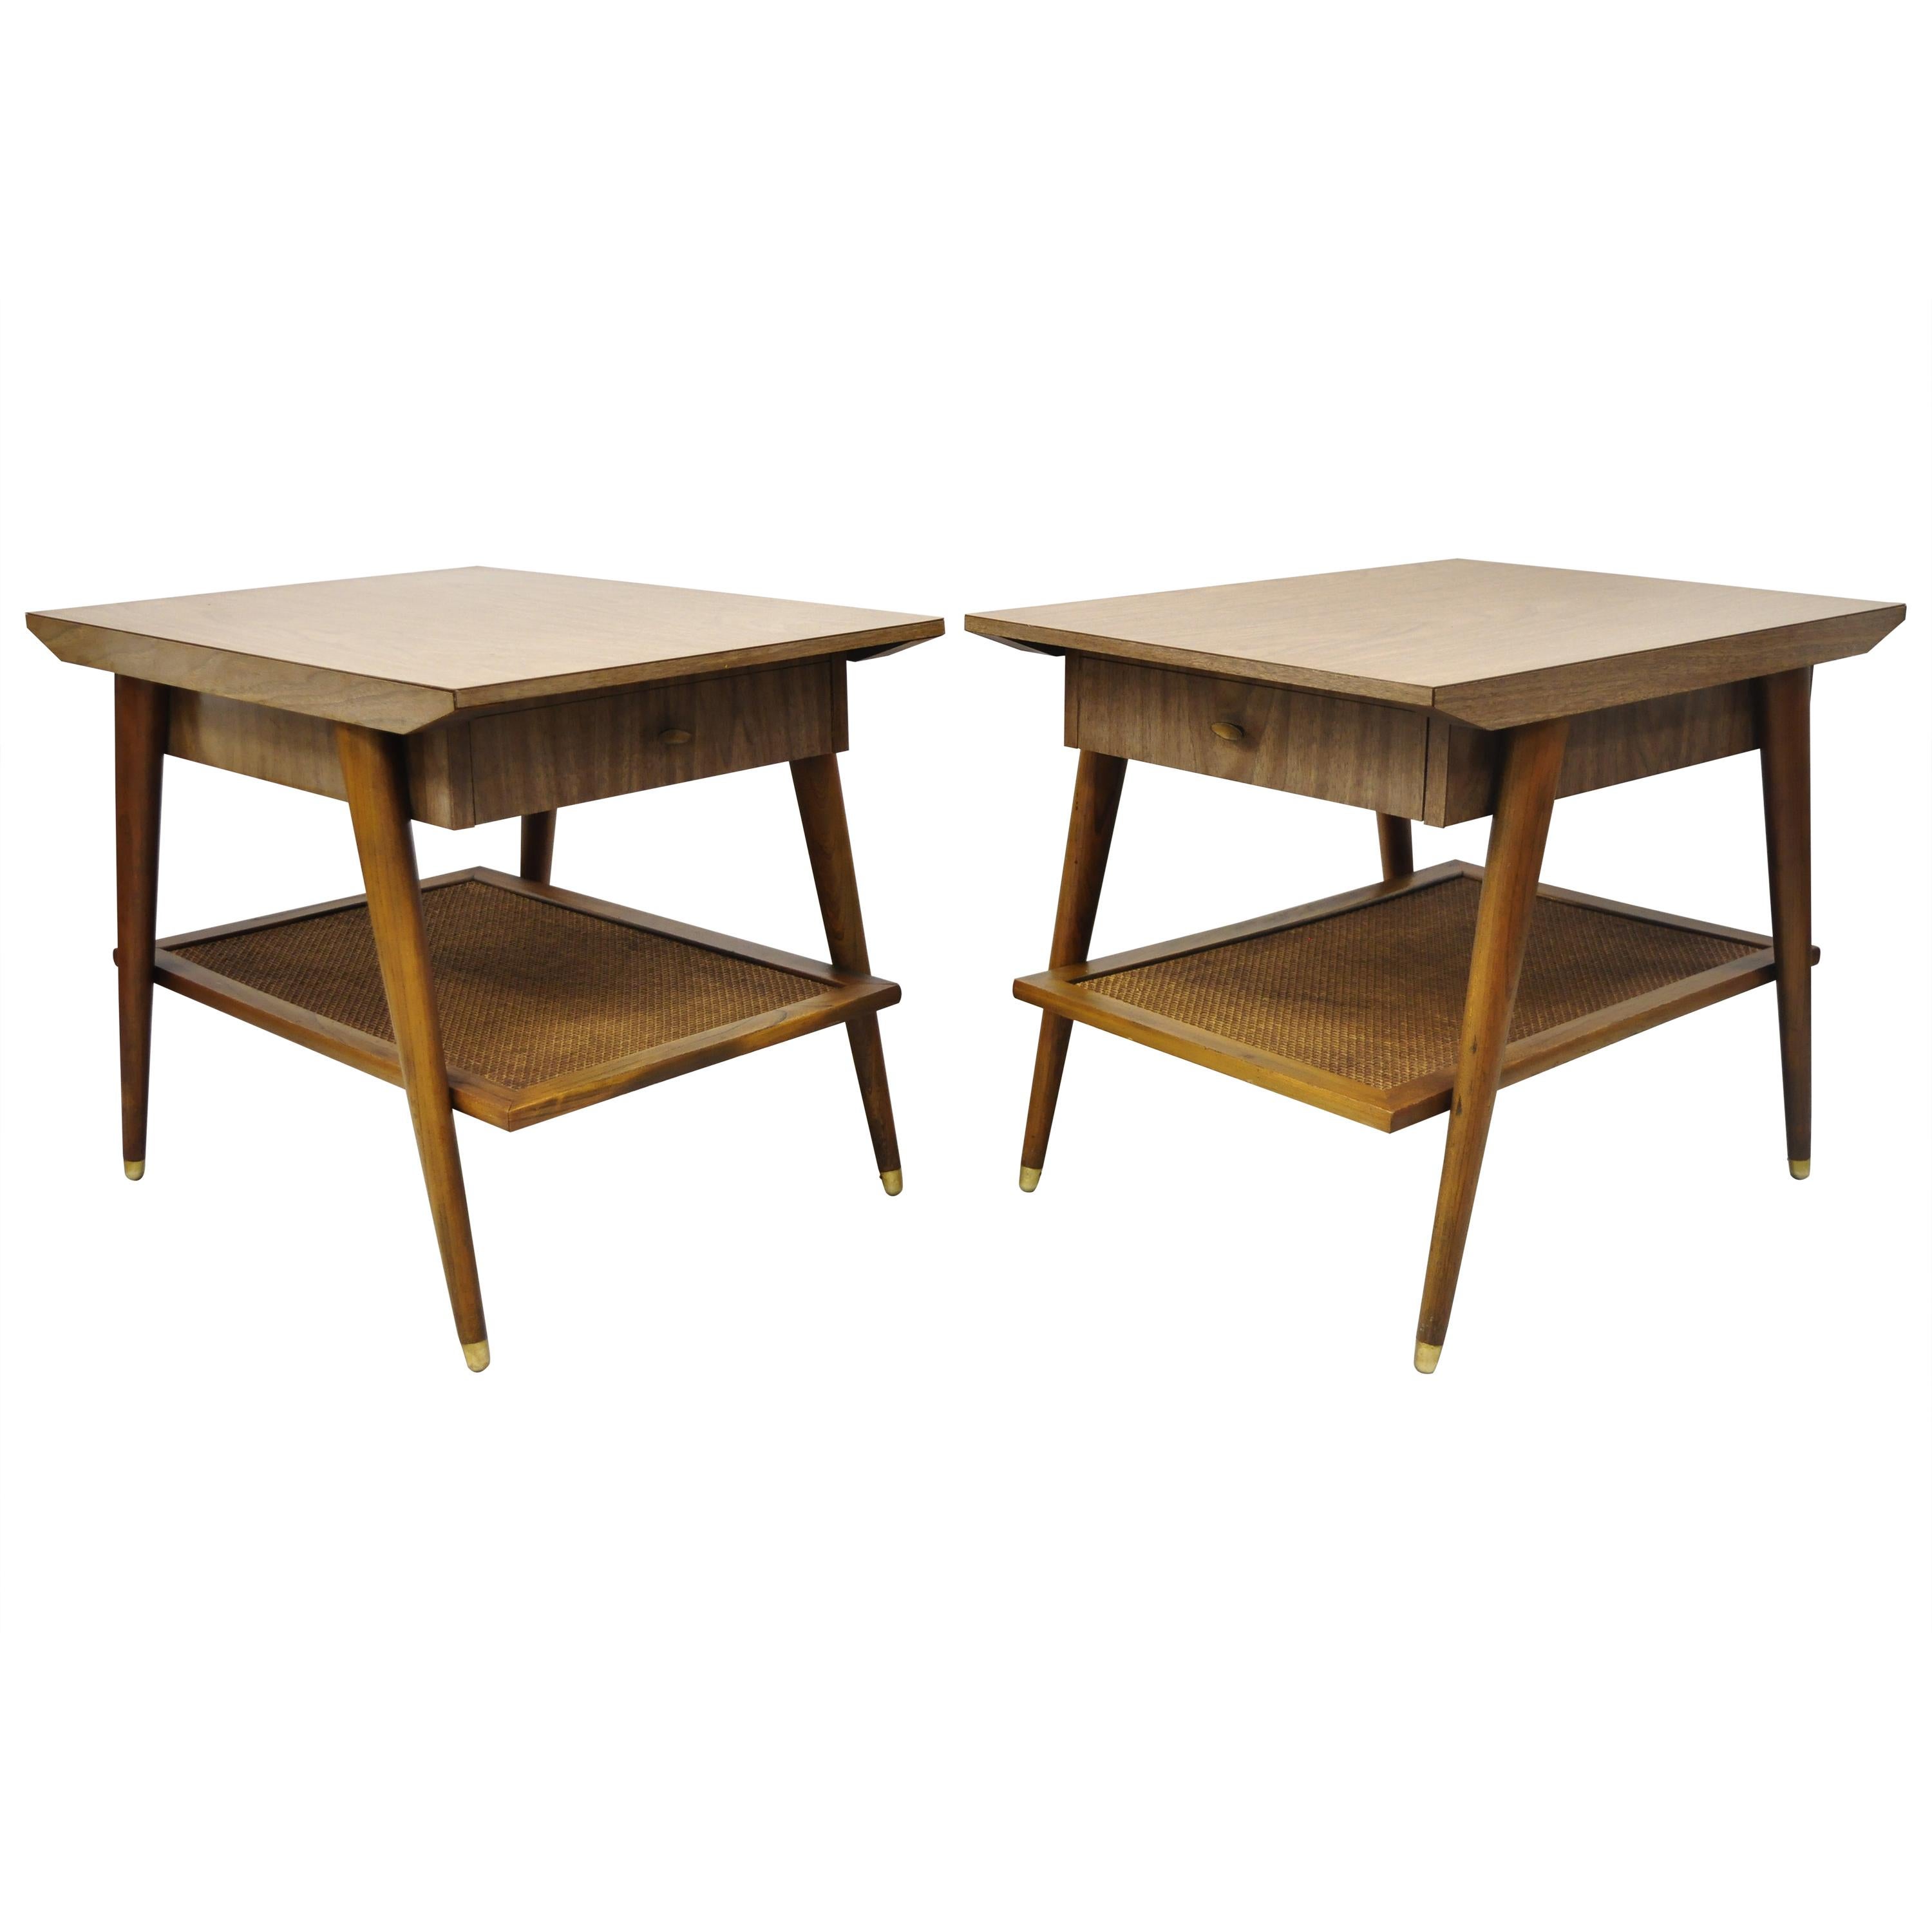 Mid Century Imperial Grand Rapids Atomic Era 2 Tier Laminate End Tables - a Pair